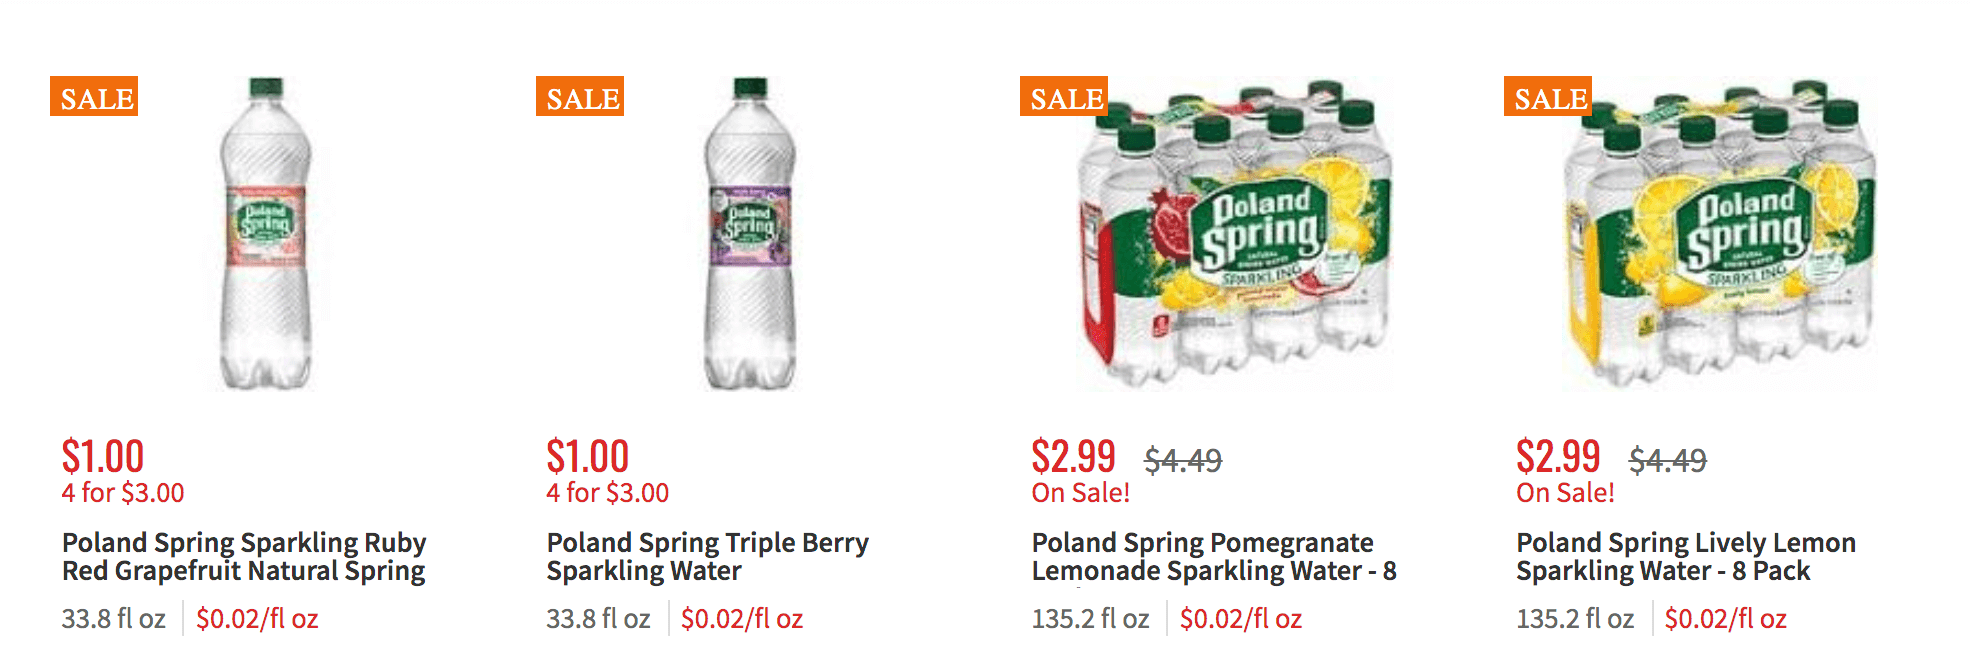 Up to 3 FREE Poland Spring Sparkling Water Multipacks at ShopRite